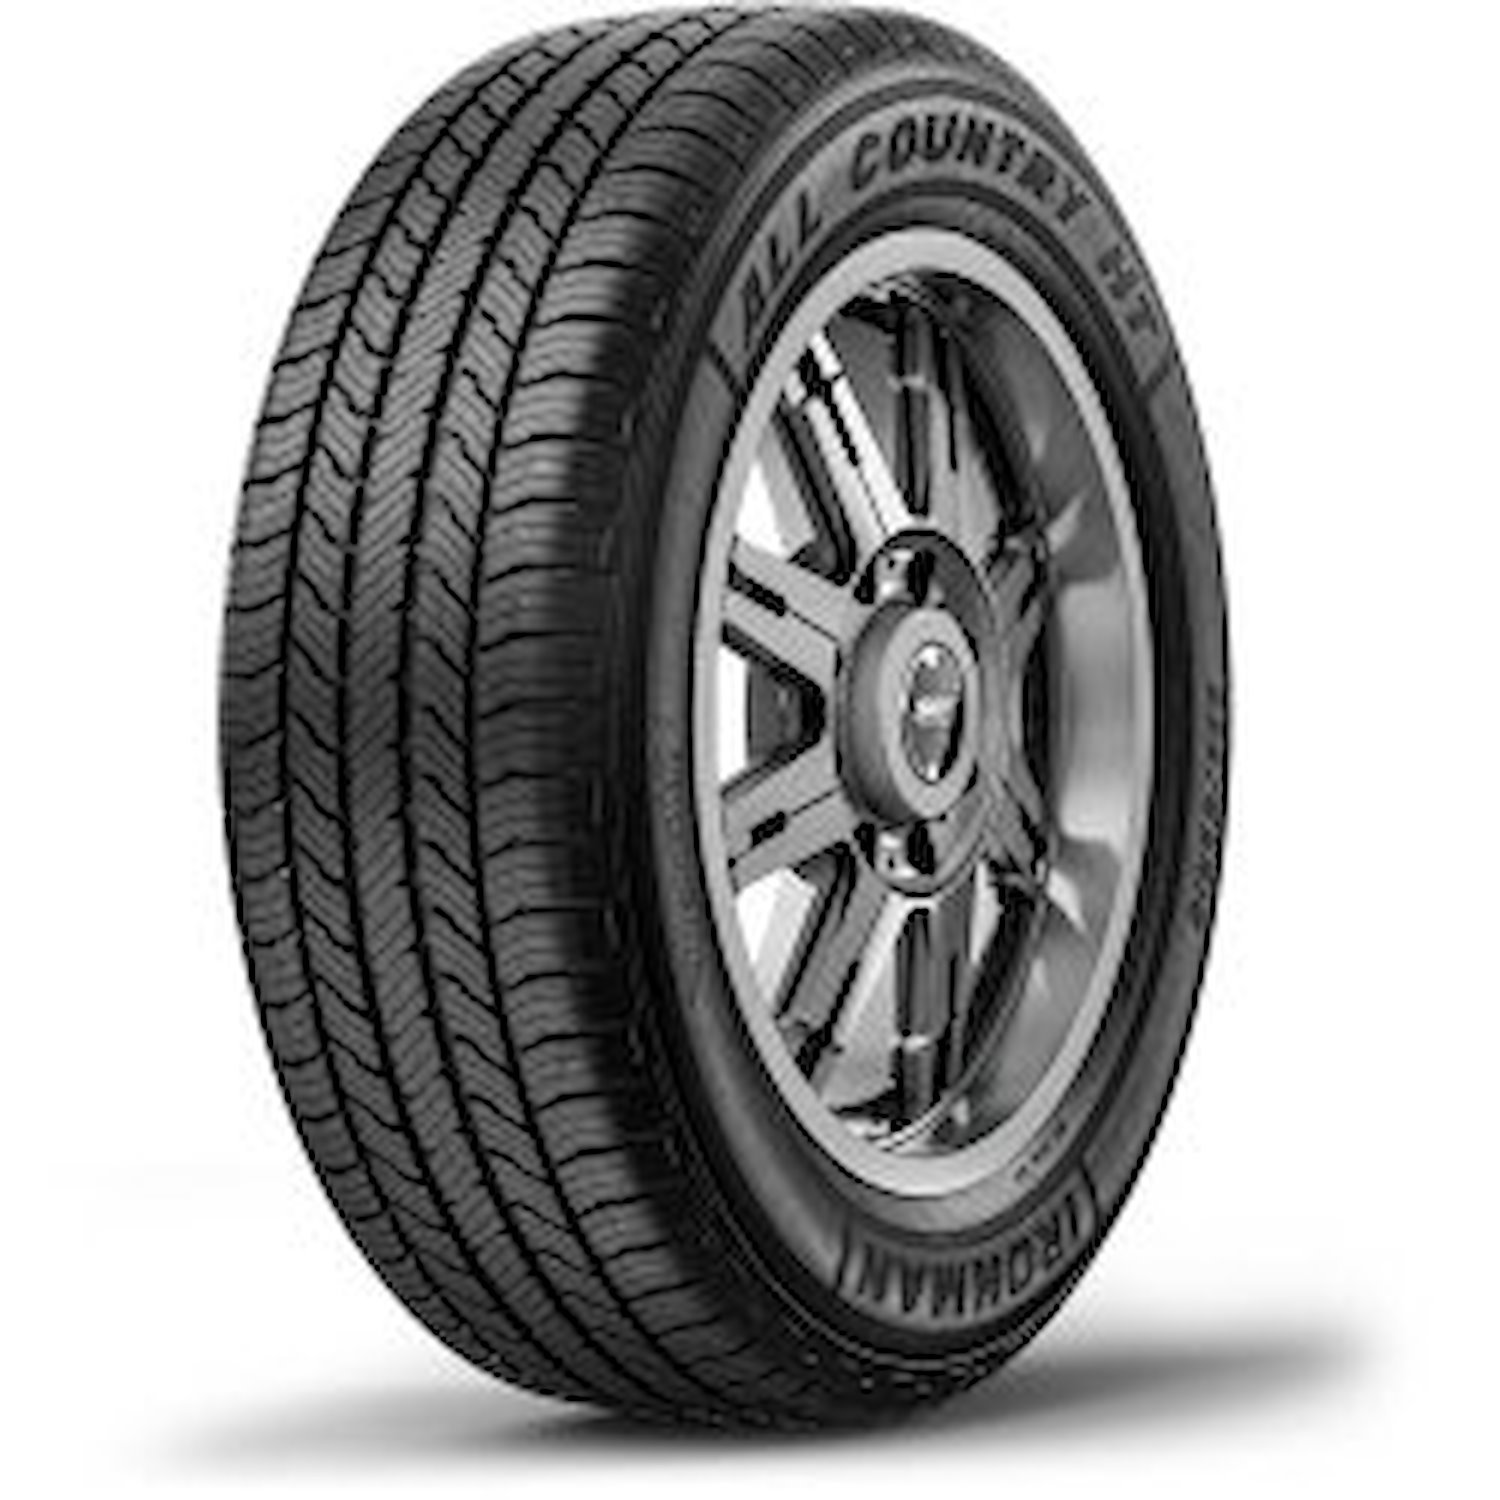 03104 All Country HT Tire, 255/70R17, 112T